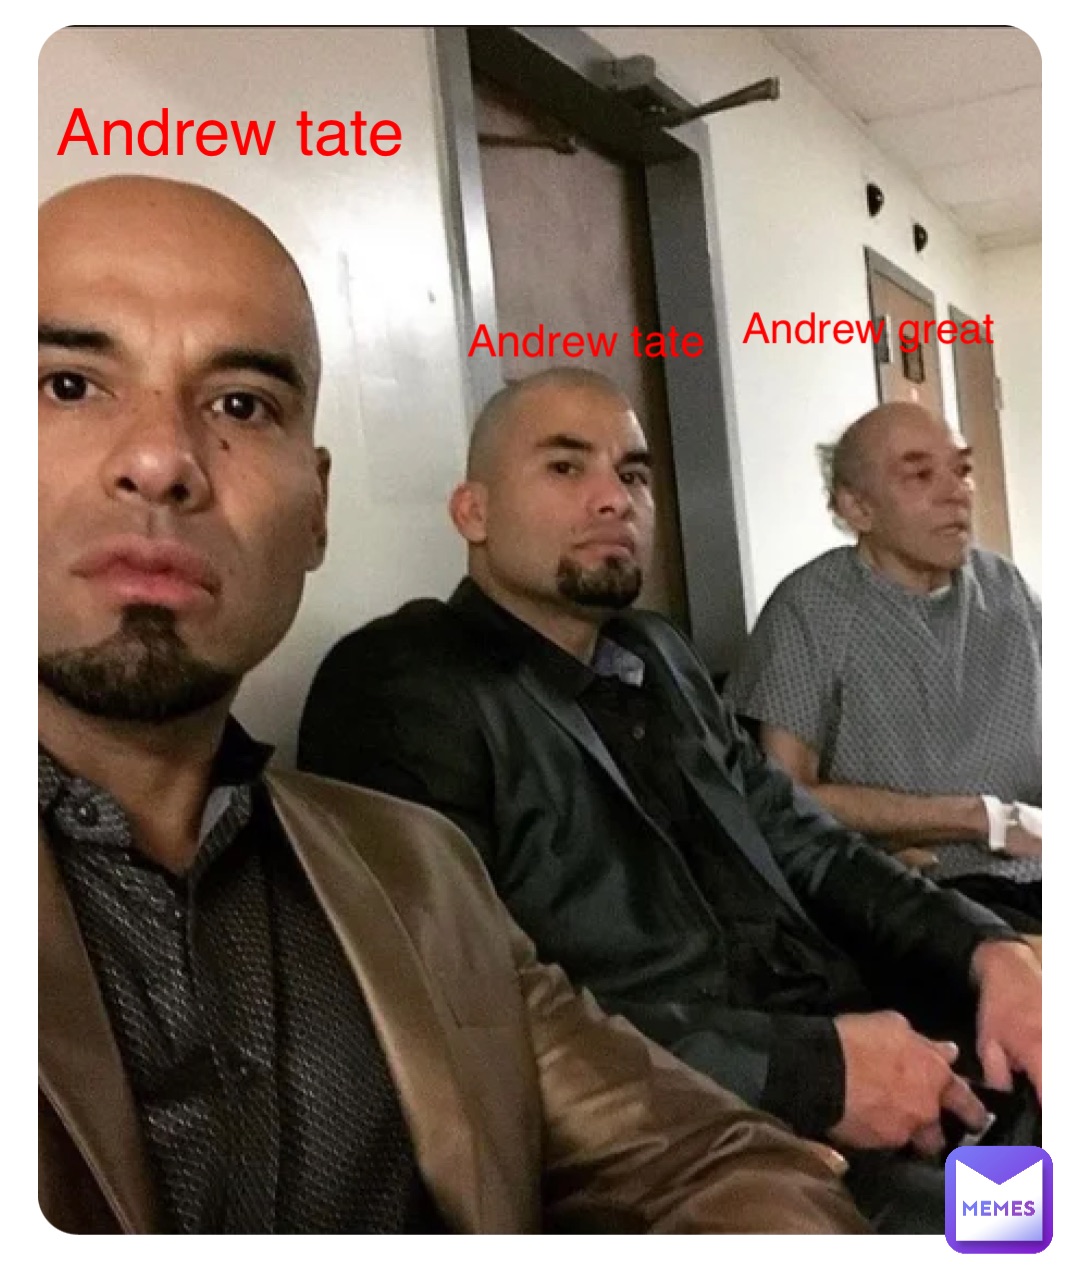 Andrew tate Andrew tate Andrew great